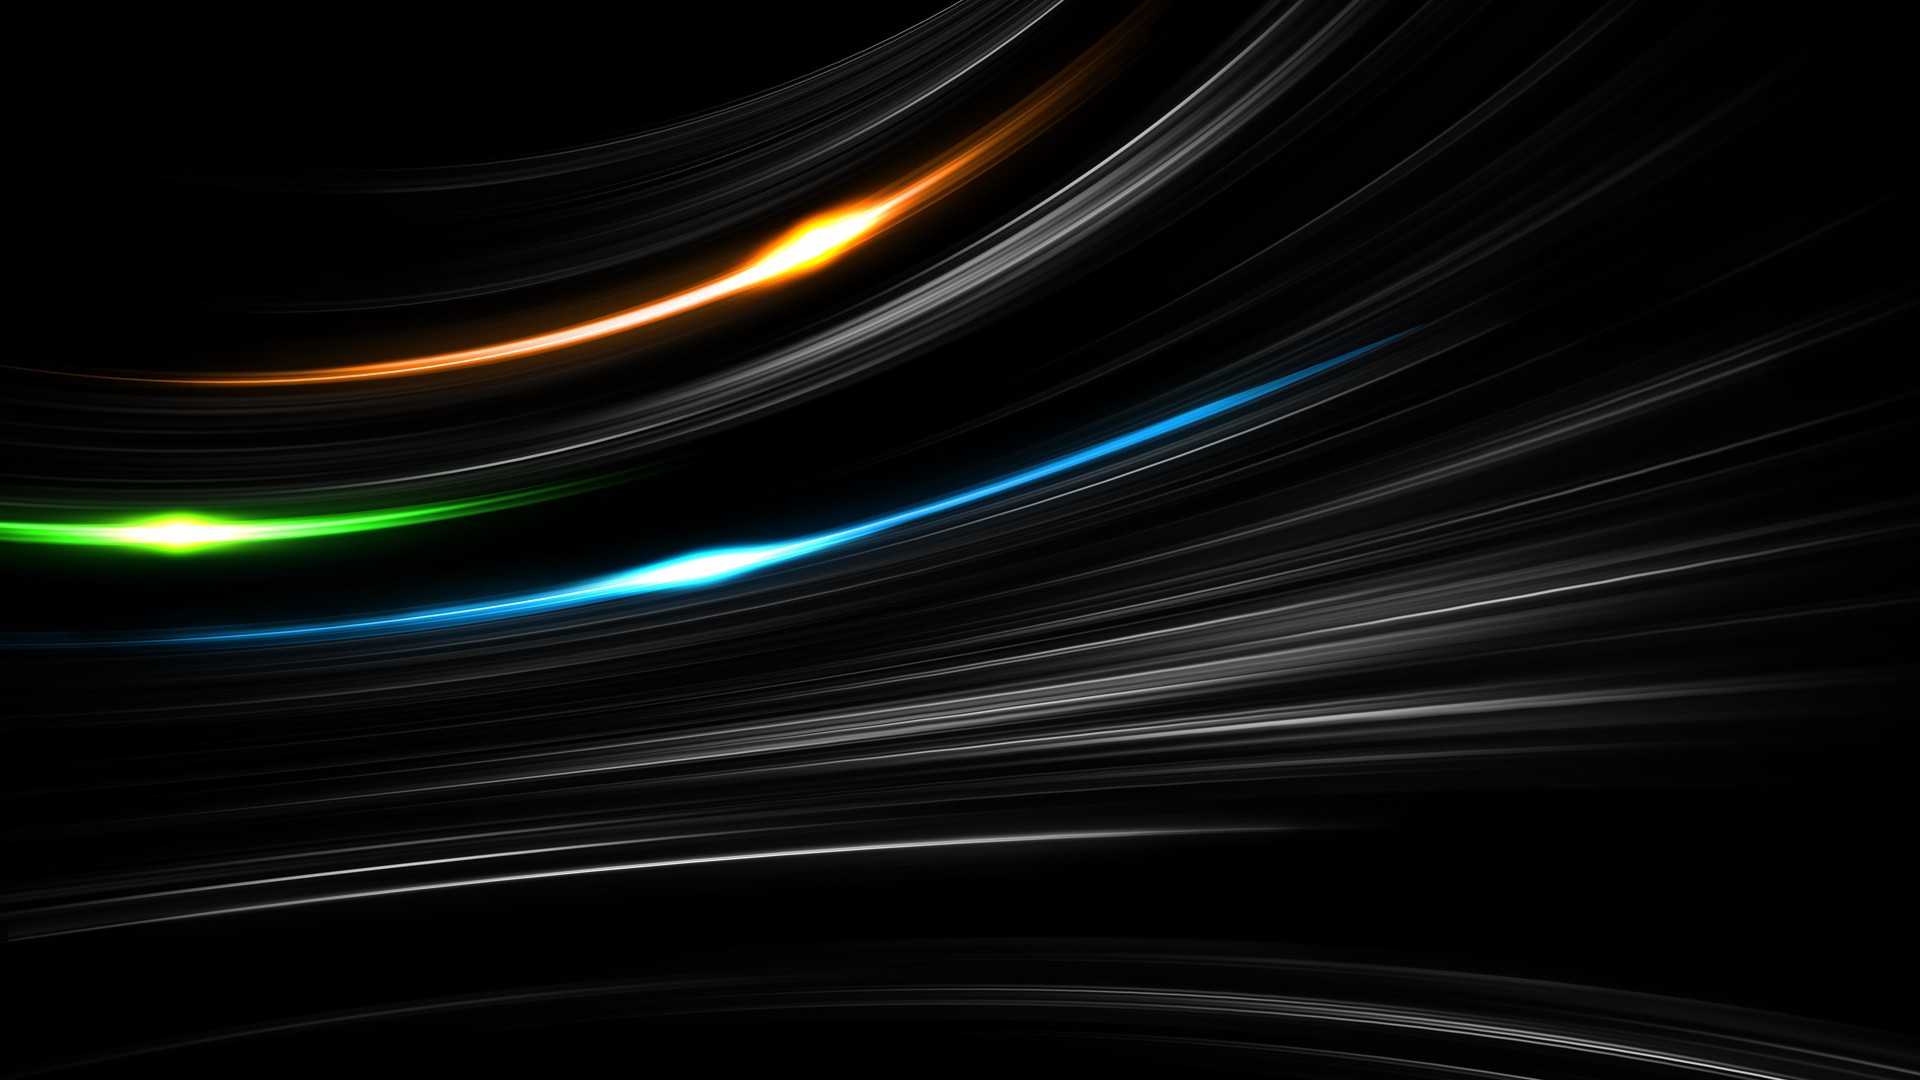 Minimalism Black Background Digital Art Abstract Lines Glowing Orange Blue Green Beam Selective Colo 1920x1080